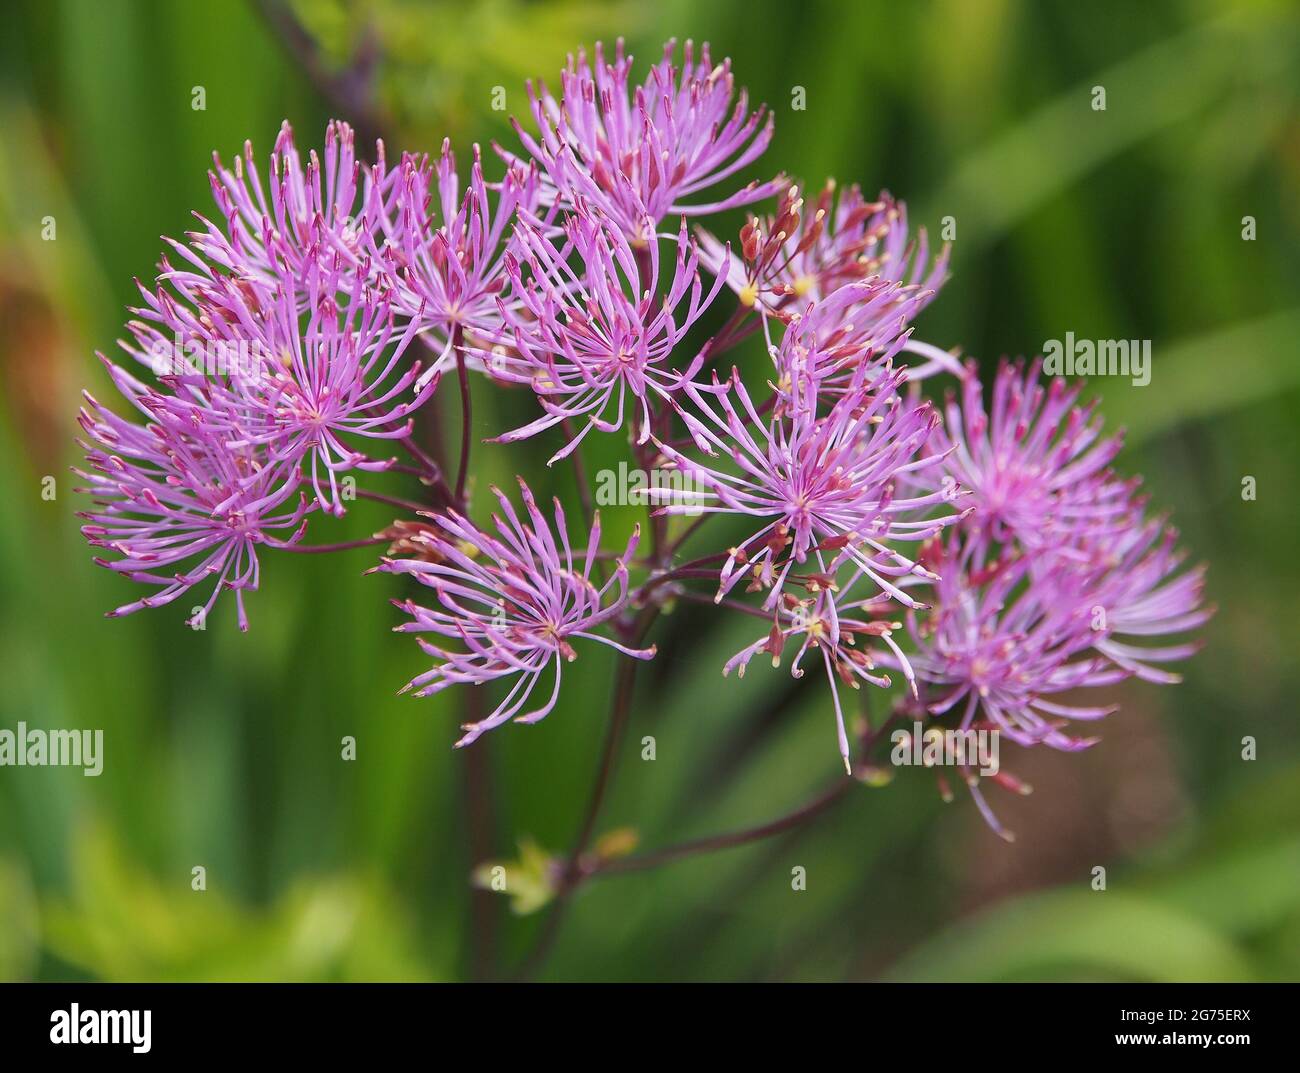 The feathery blooms of the Thalictrum Aquilegifolium l(French Meadow Rue) in flower in one of the borders at RHS Bridgewater, Salford, Manchester, UK. Stock Photo